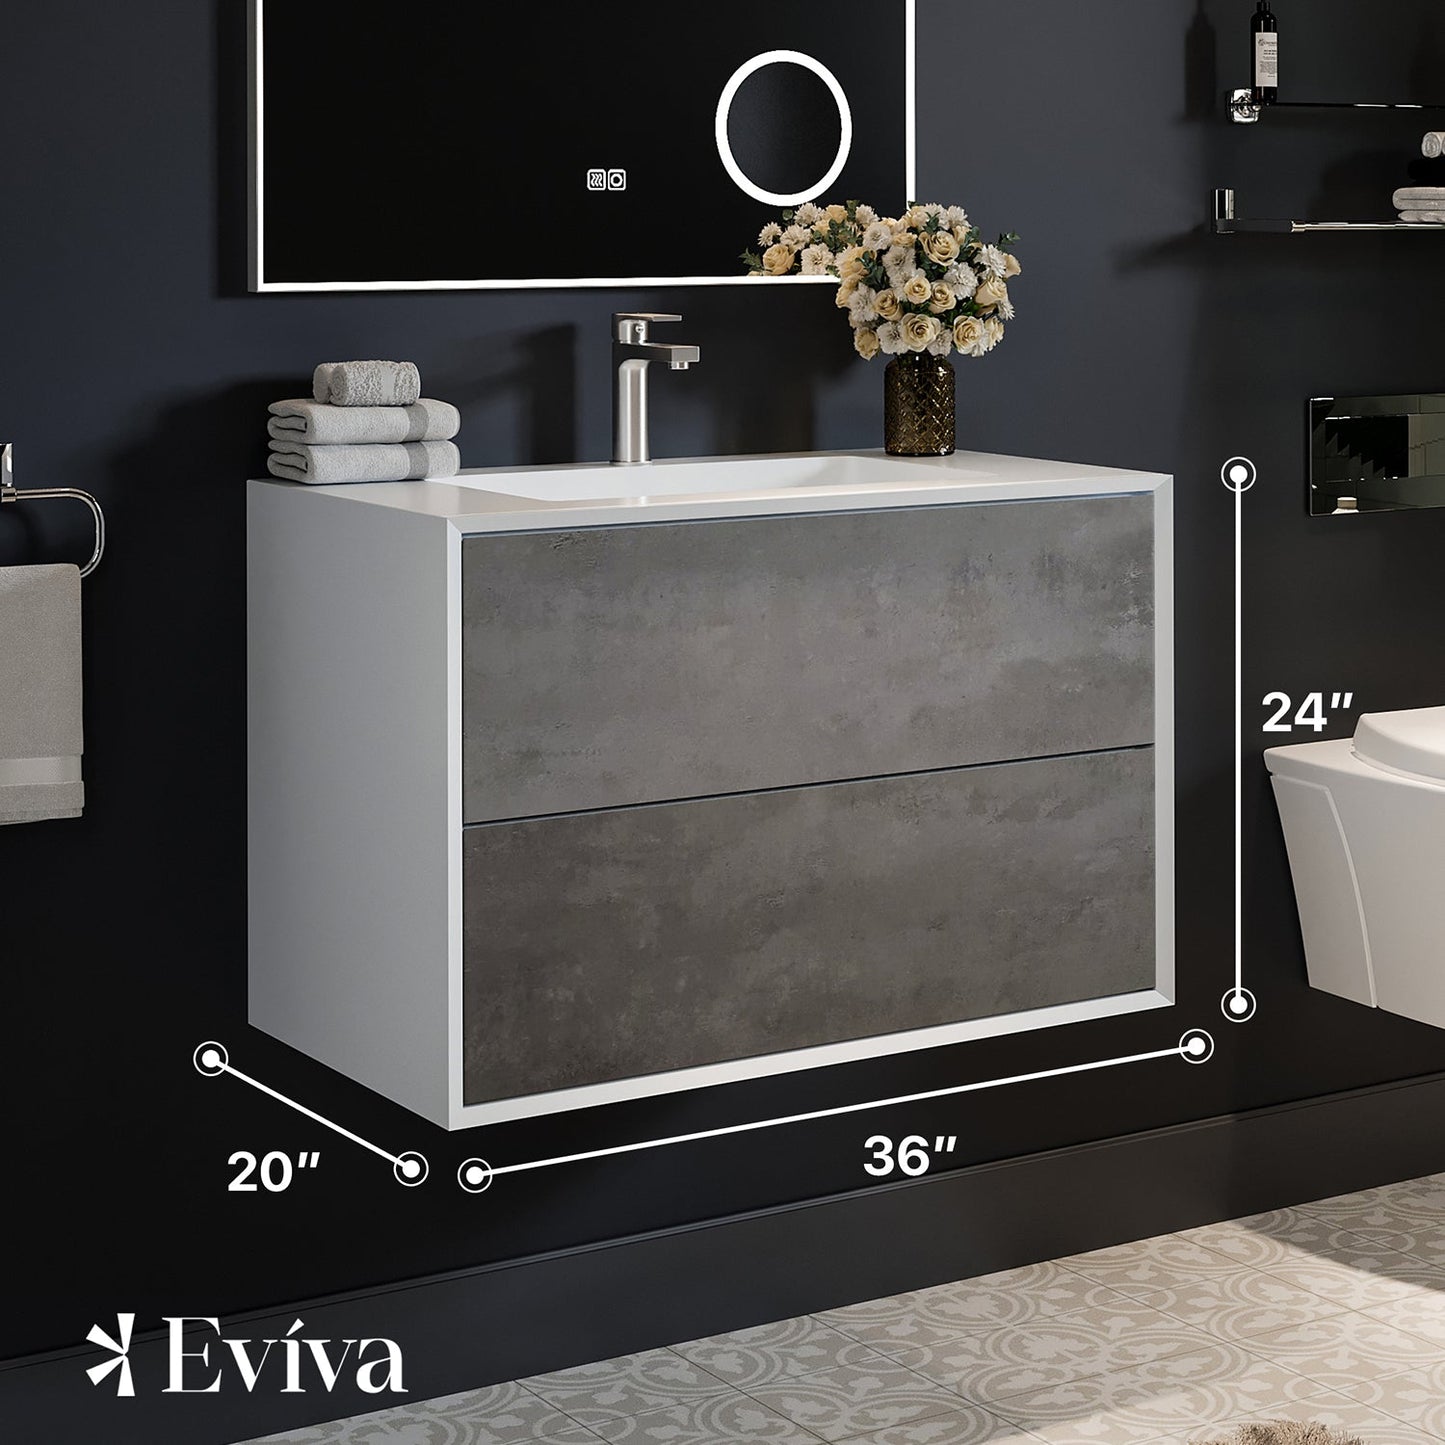 Eviva Vienna 36" Cement Gray w/ White Frame Wall Mount Bathroom Vanity w/ White Integrated Top